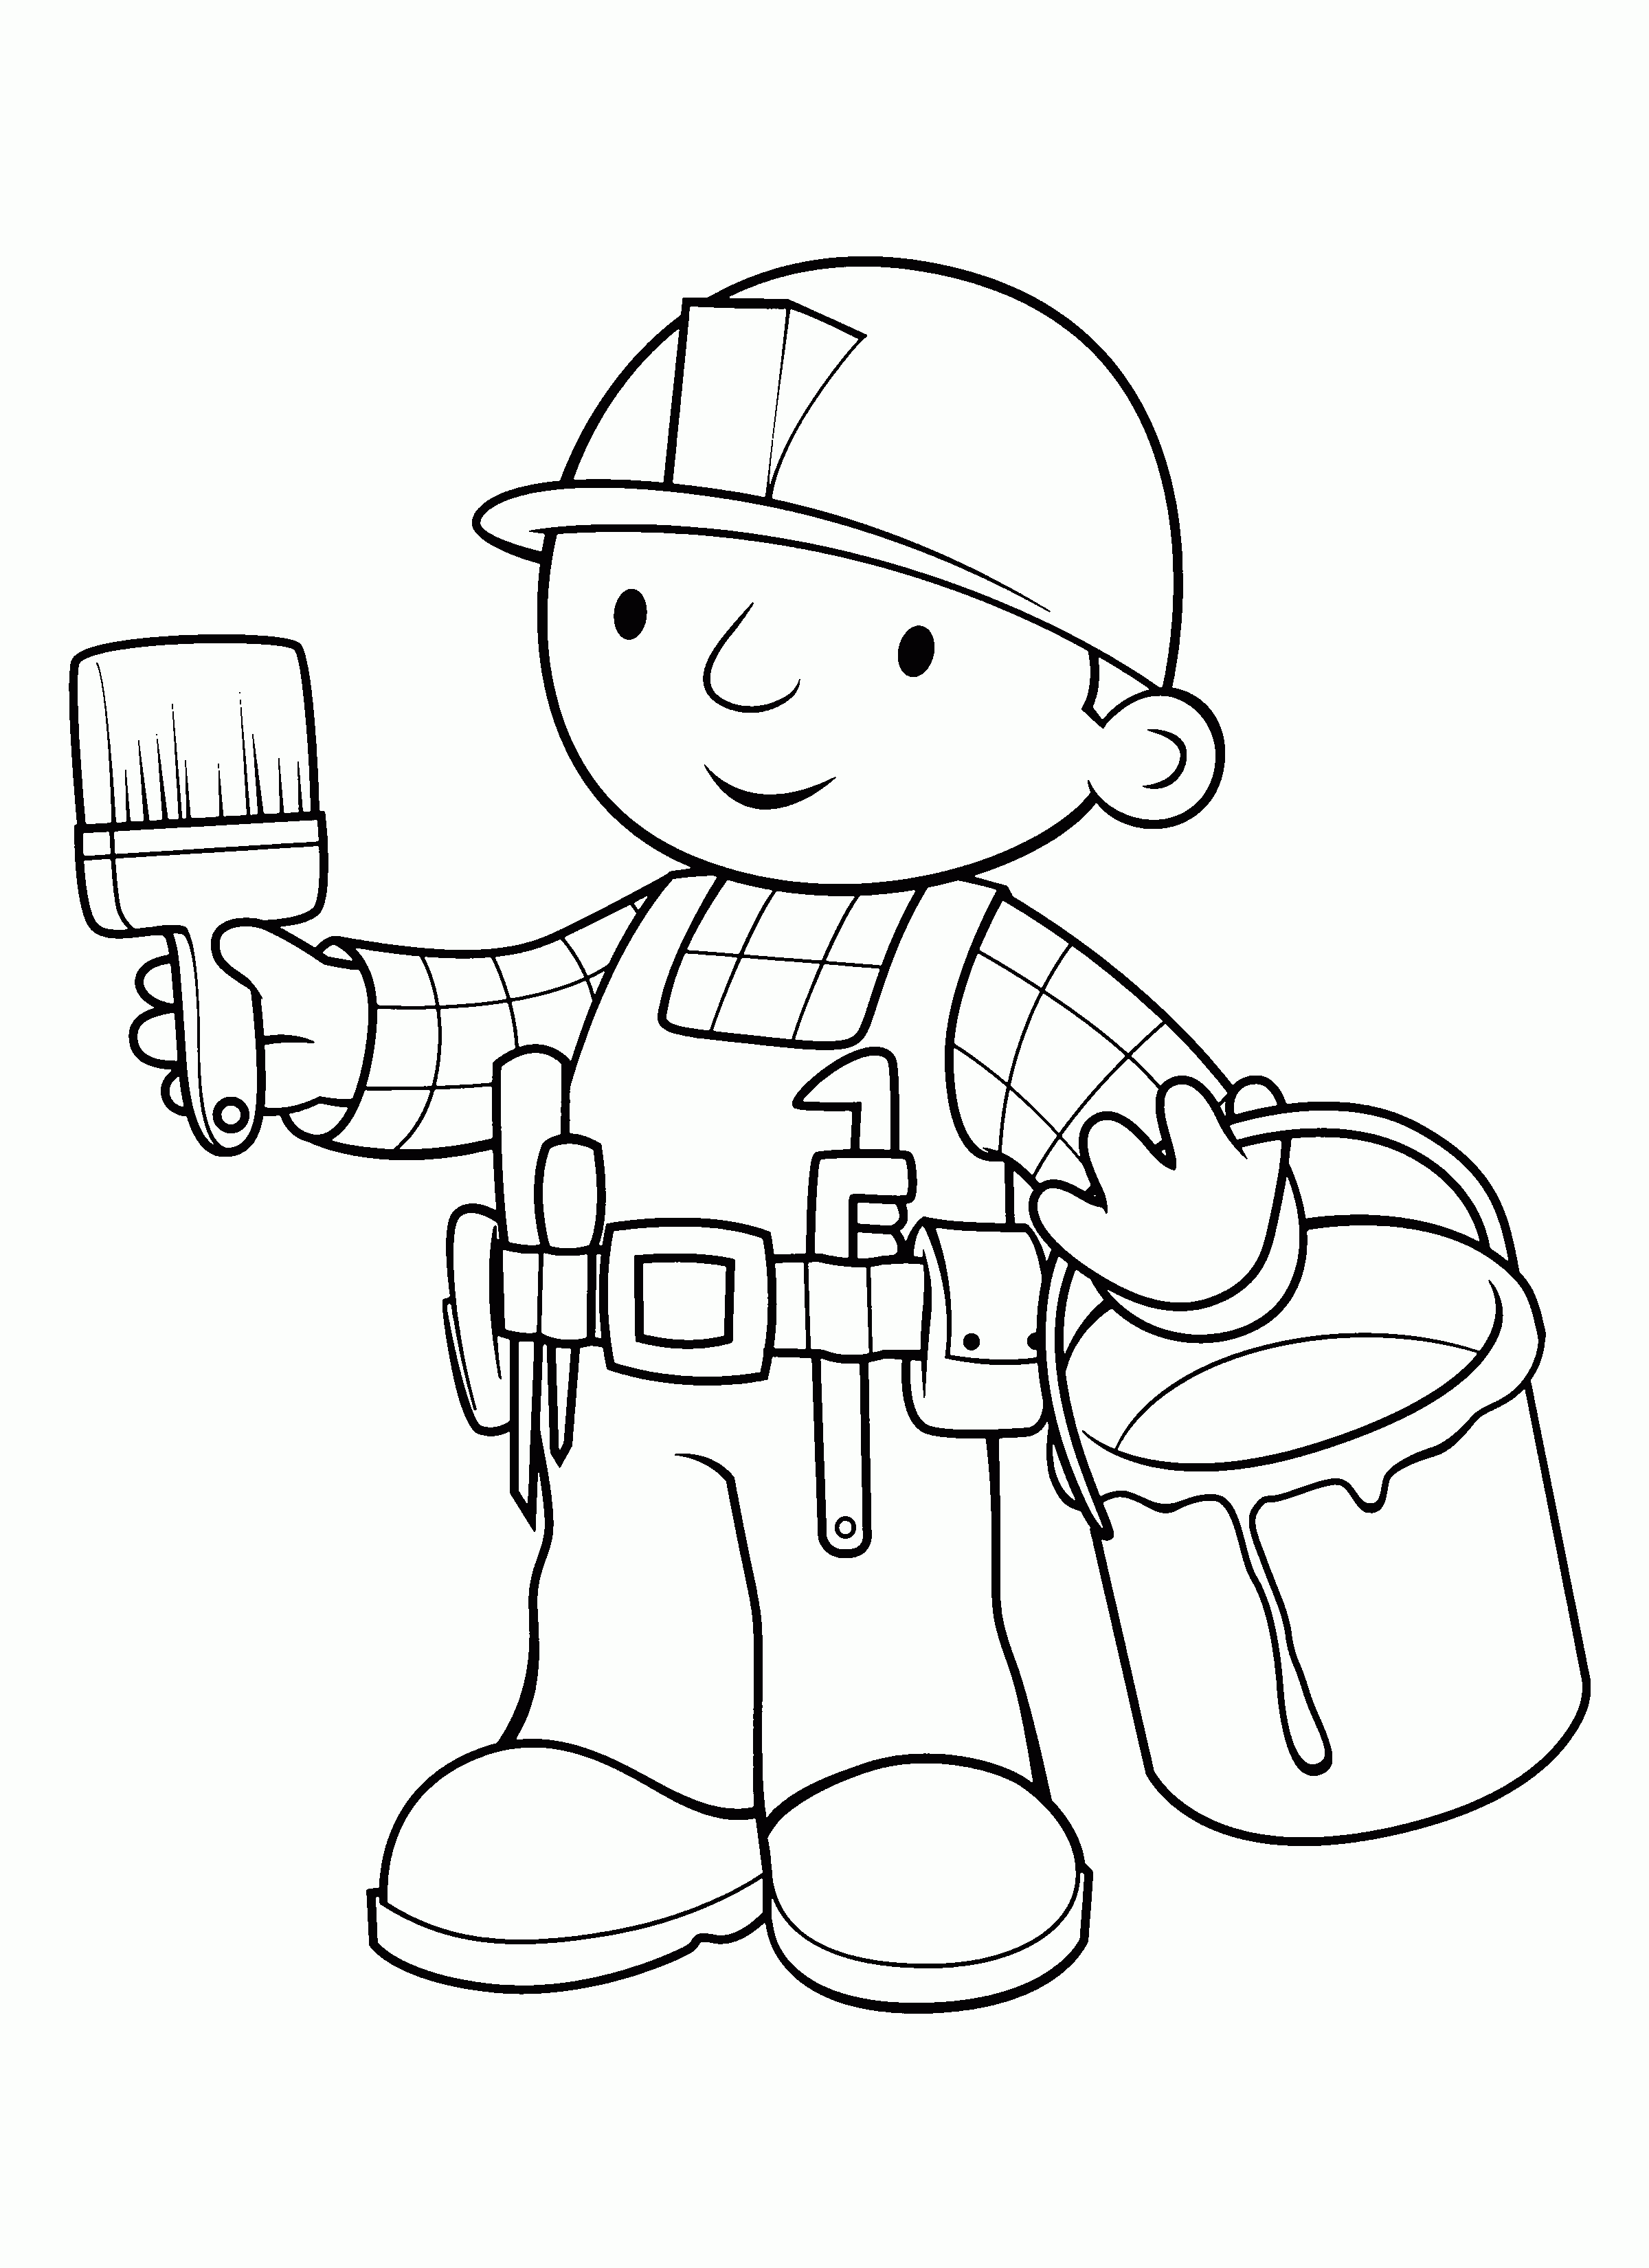 Train Bob The Builder Coloring Pages - Widetheme